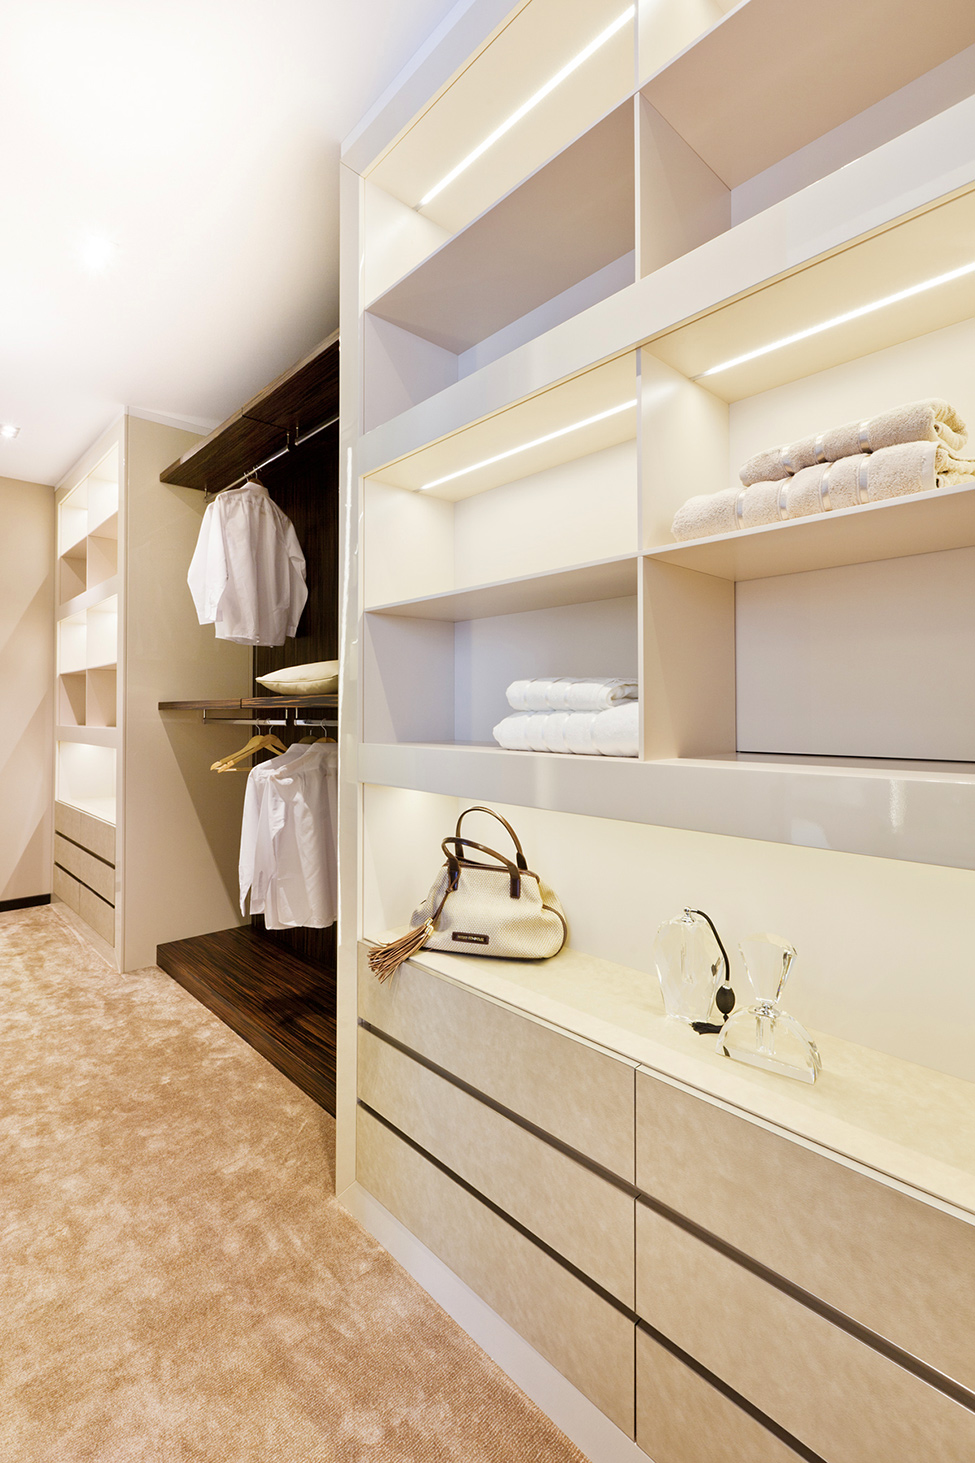 Spacious Closet White Glamorous Spacious Closet With Minimalist White Cabinet And Shelves Stainless Steel Railing Sleek White Marble Floor Shiny LED Light Dream Homes Extravagant Luxurious Interior Decoration Brings Warm And Cozy Nuance